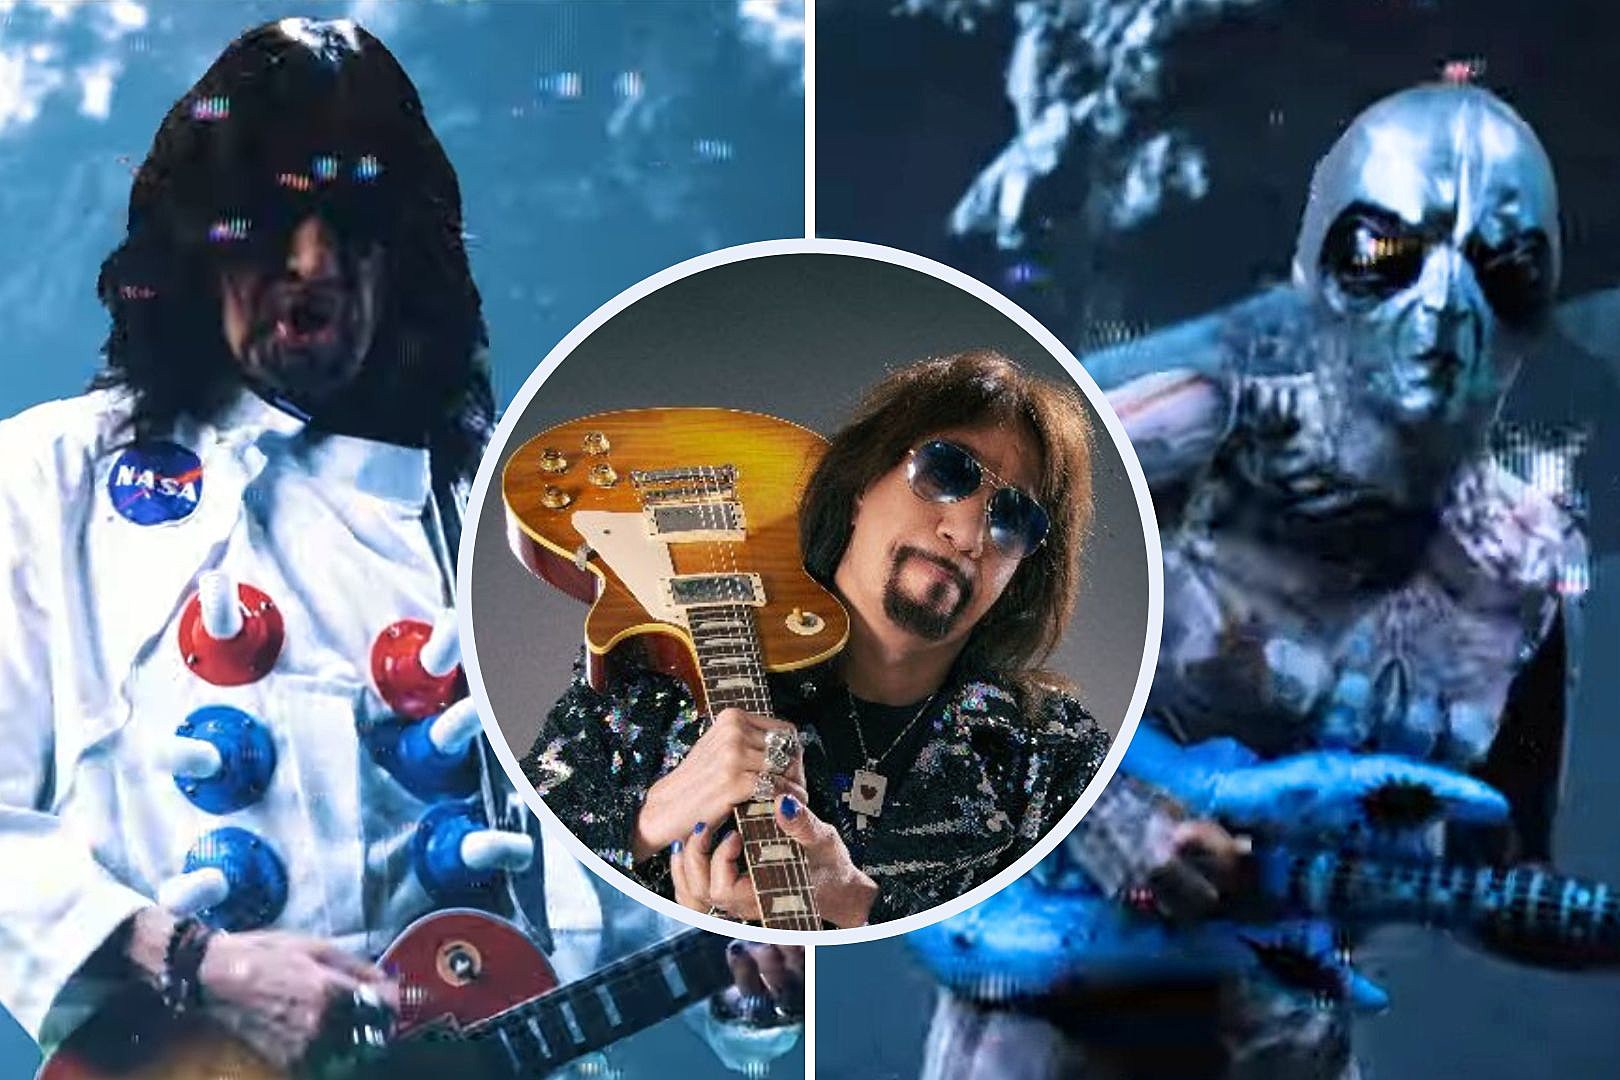 Watch Ace Frehley Space Travel in New ‘Walkin’ on the Moon’ Video